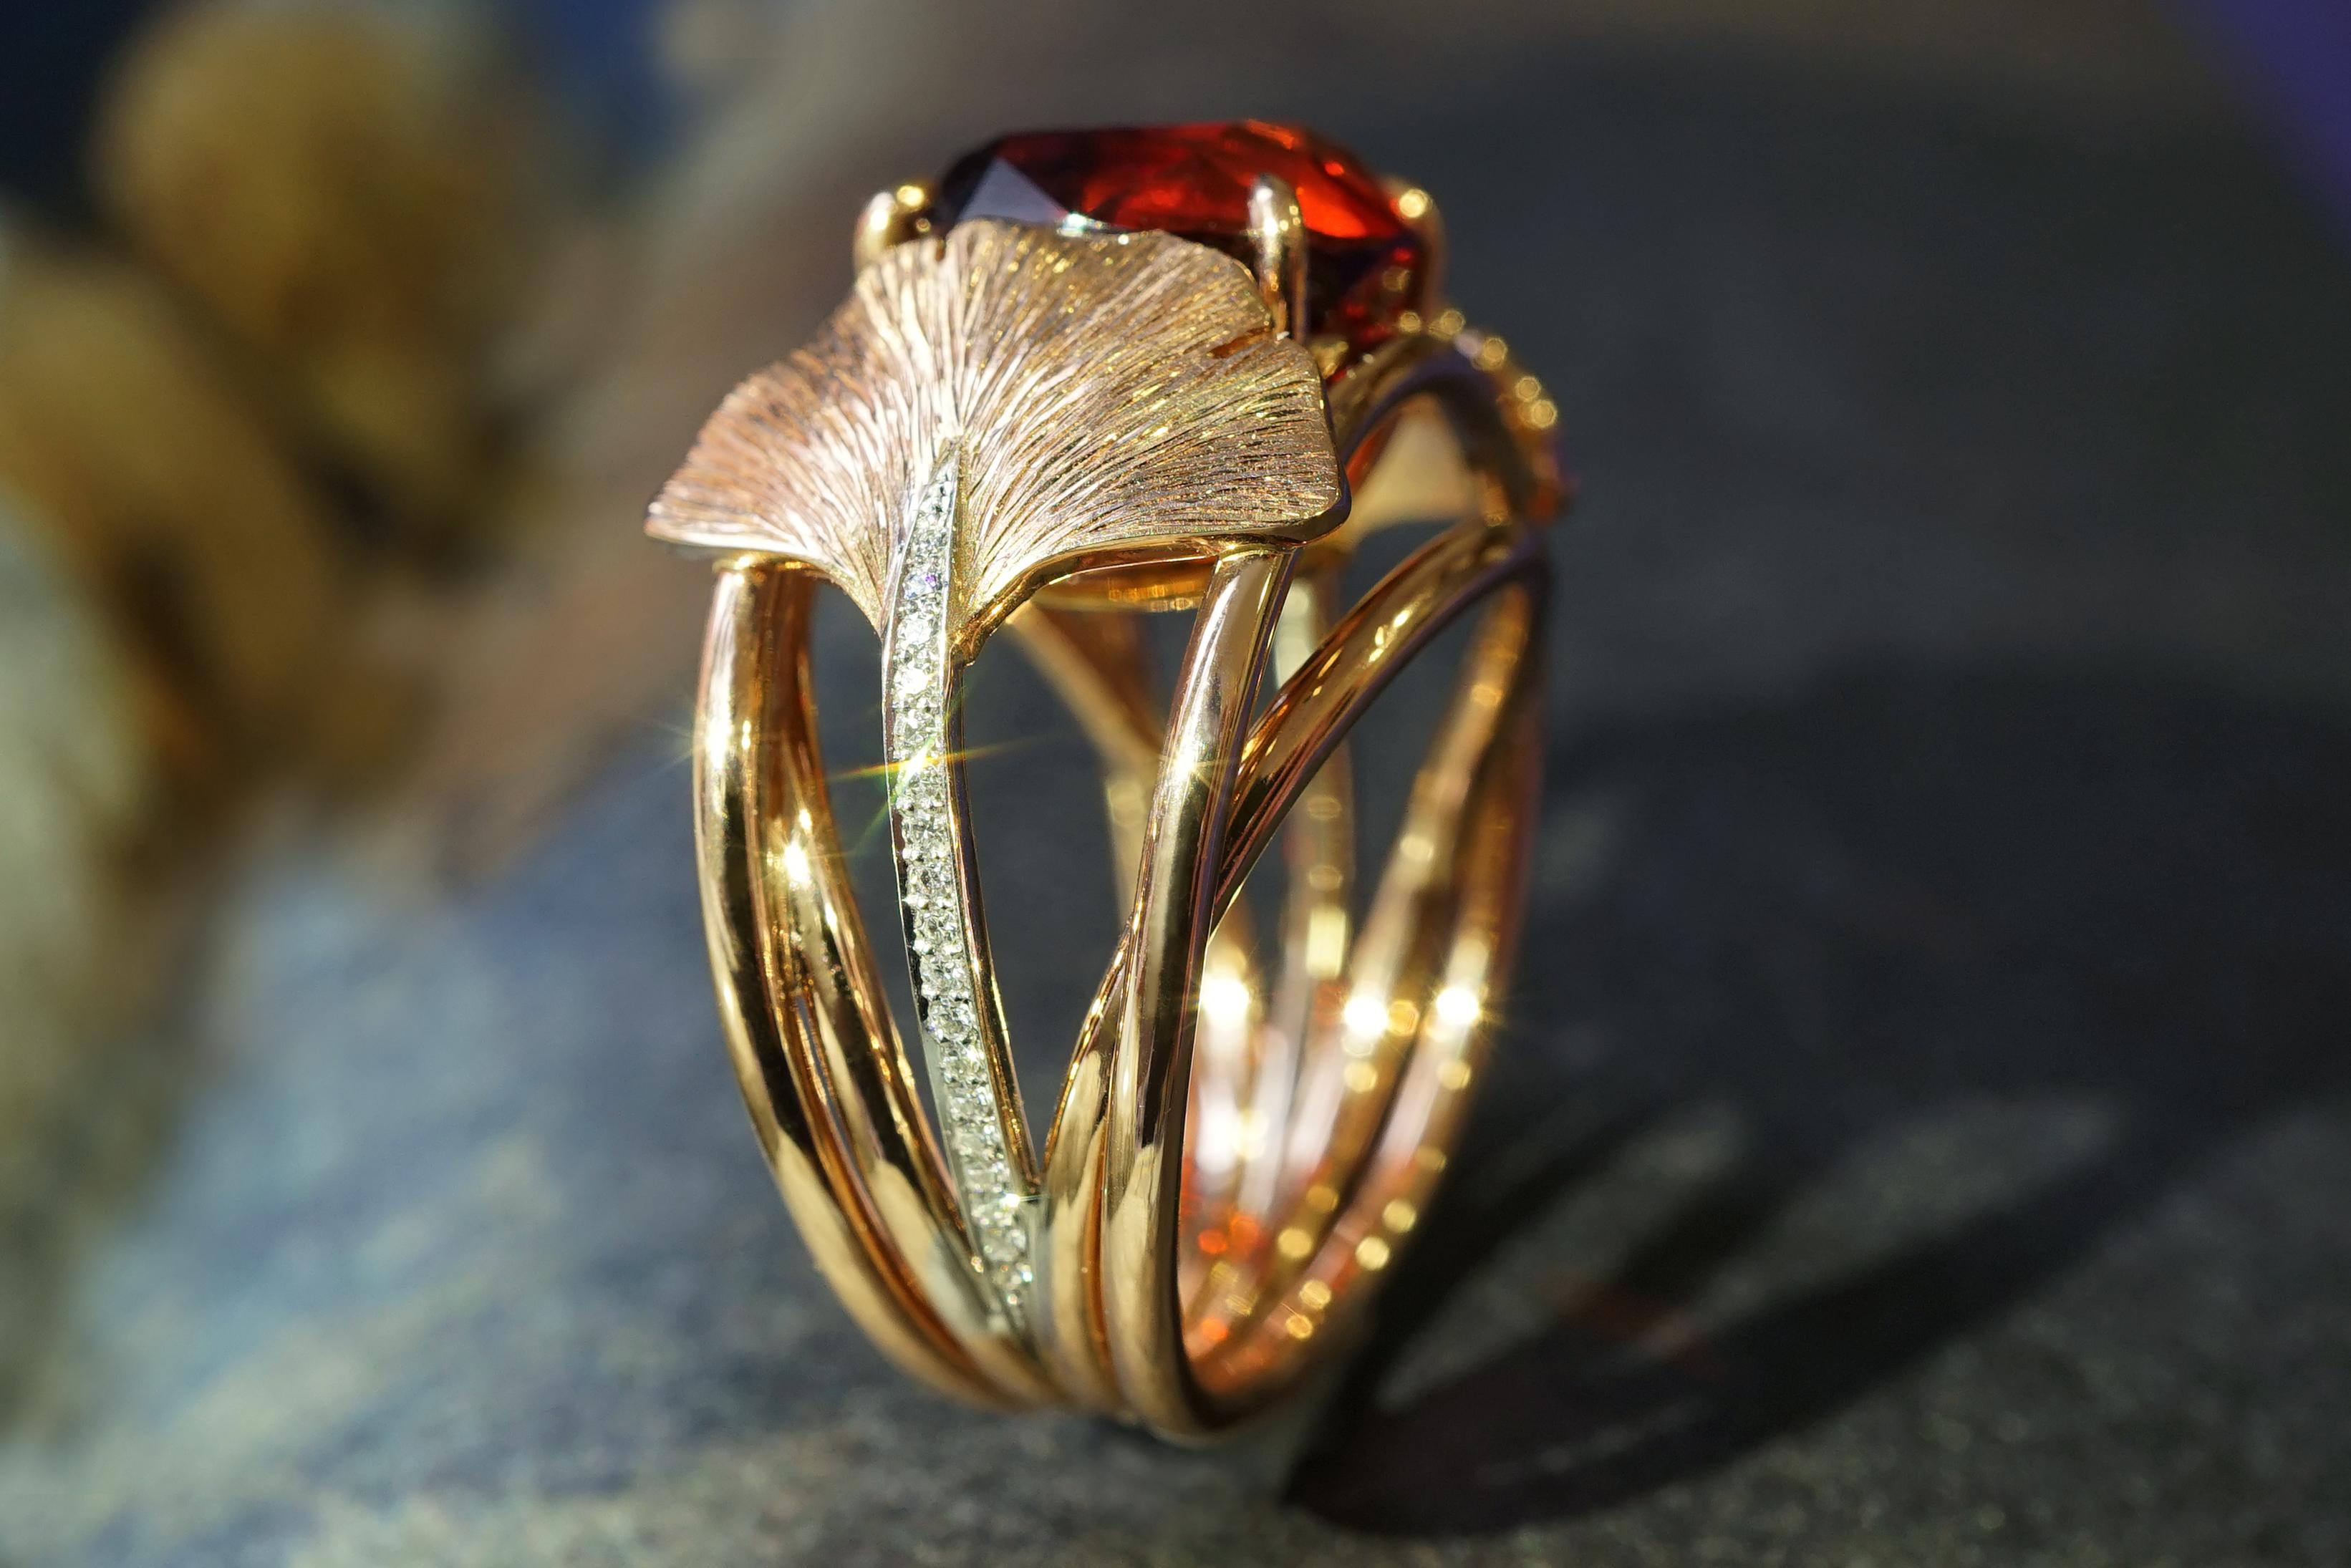 Coralie Van Caloen 18k Red Gold Ring With Red Garnet, Diamond And Engraved Gingko Leaves is entirely hand made and forged in Belgium by experts goldsmiths therefore it is a very unique piece. The bright red garnet has a very vibrant colour and sits